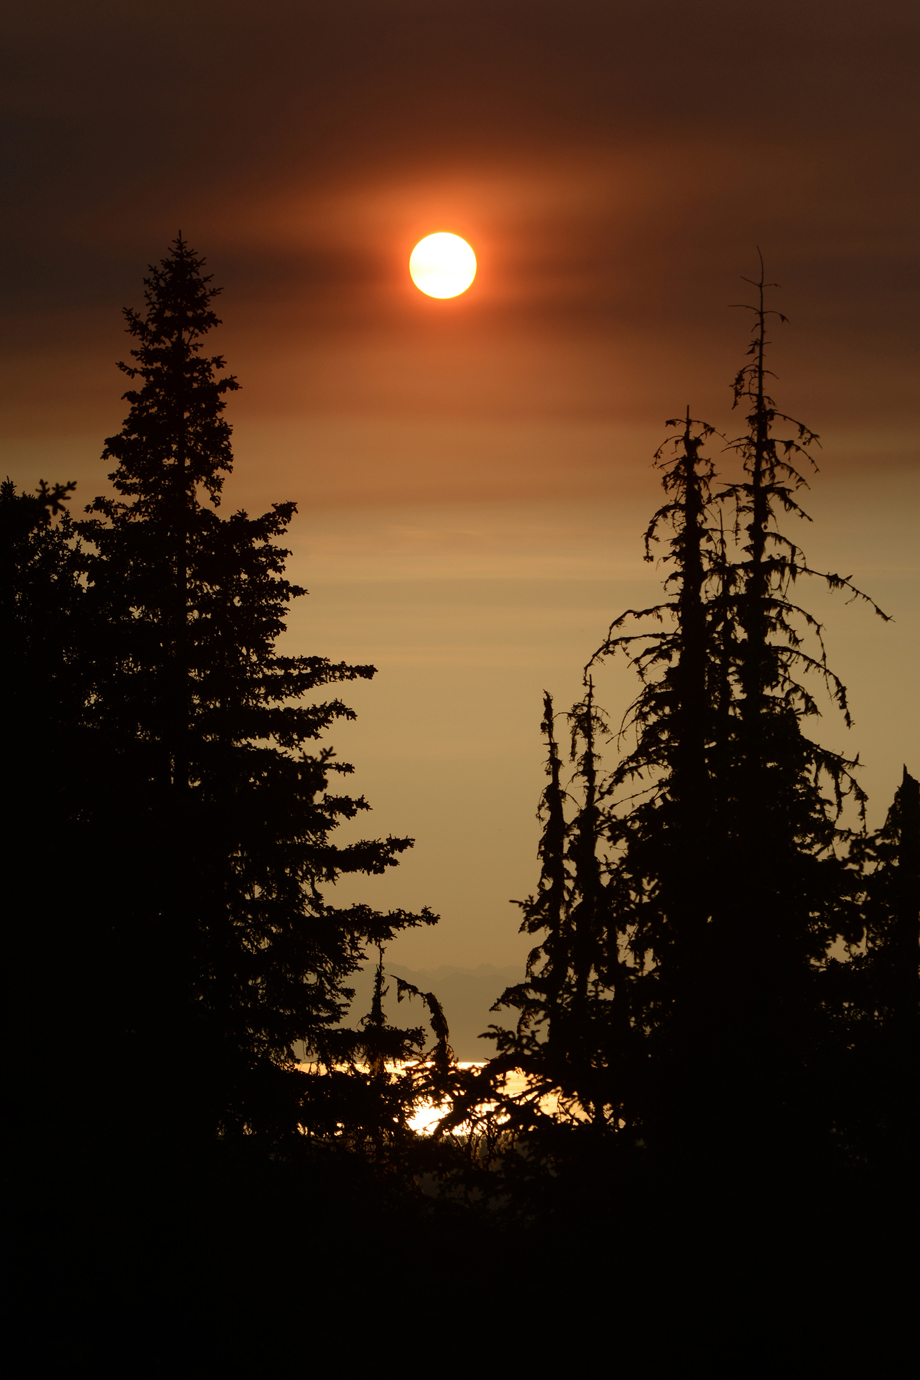 Haze from the Sockeye Fire near Willow obscures the sun as it sets over Cook Inlet on Monday night as seen from Diamond Ridge. By Wednesday morning, the Sockeye Fire had burned 7,500 acres. On the central Kenai Peninsula, firefighters are working to contain the 2,000-acre Card Street fire.-Photo by Michael Armstrong, Homer News